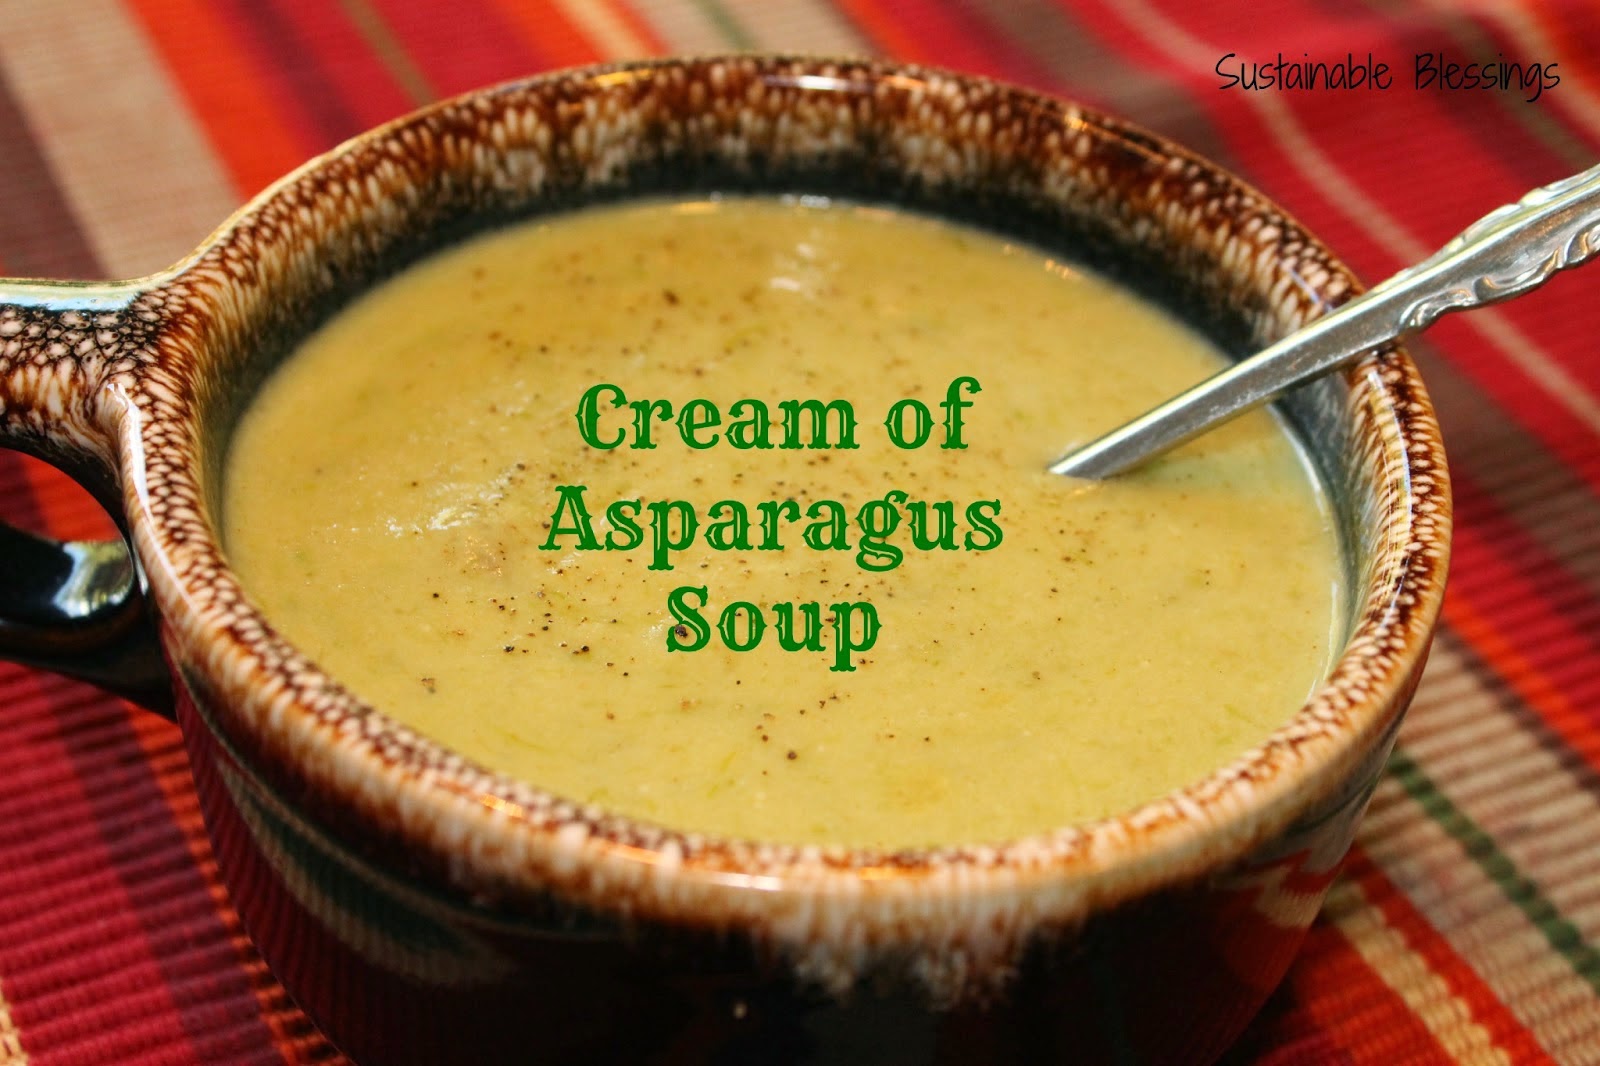 http://www.sustainableblessings.com/2013/07/cream-of-asparagus-soup.html